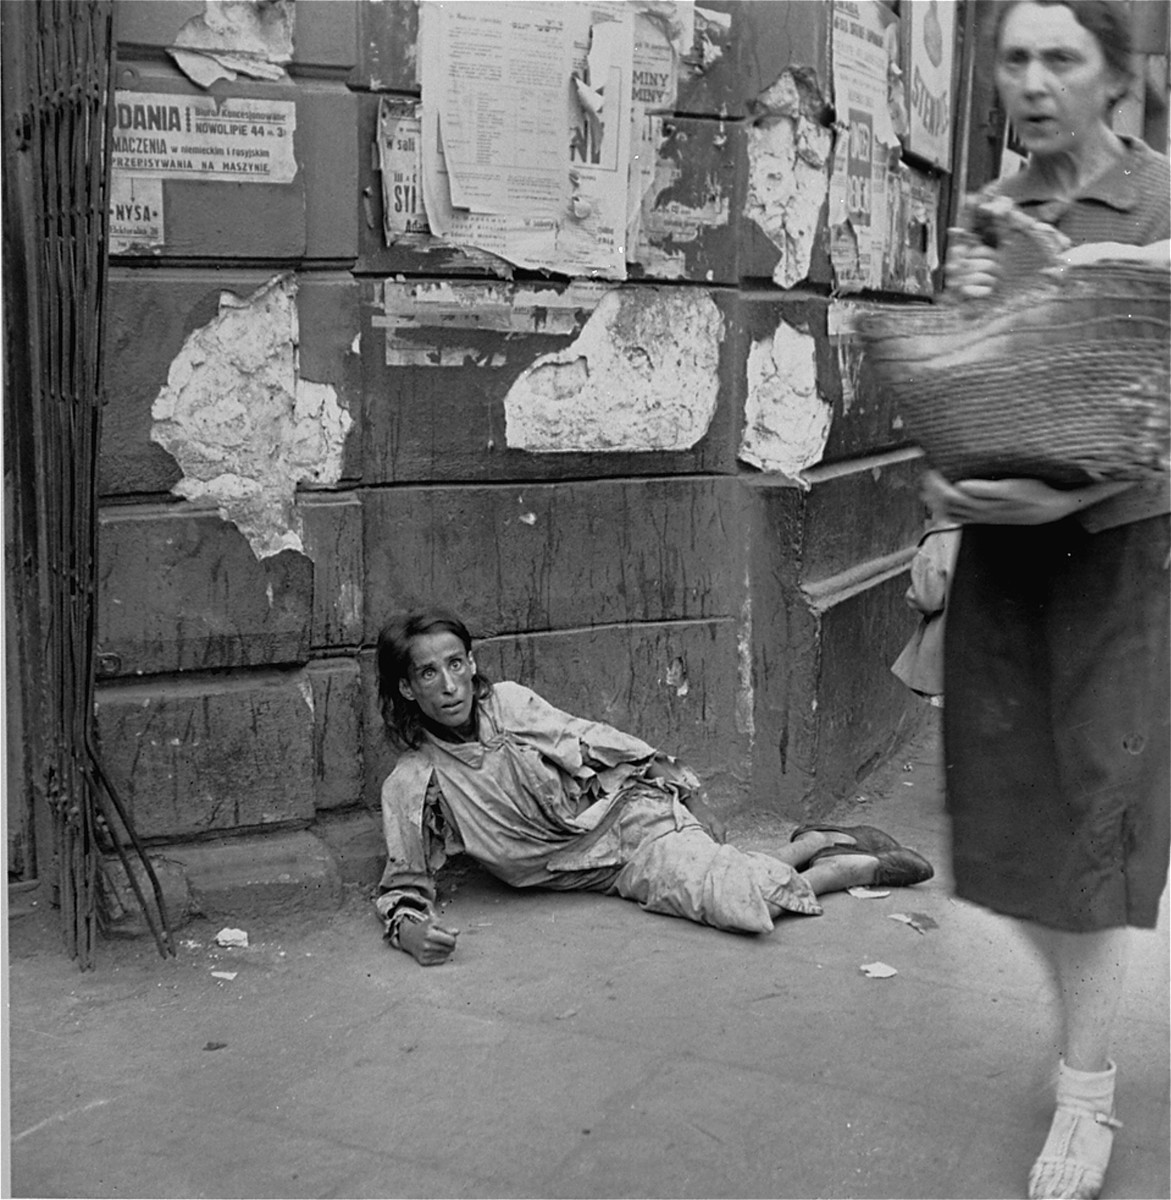 A destitute woman lies on a sidewalk along Nowolipie Street in the Warsaw ghetto.  

Joest's caption reads: "I photographed this begging woman with fixed, staring eyes on Nowolipie Street as people went by.  [Hanging] above her was a small placard advertising an office on 44 Nowolipie Street where German and Russian could be translated."